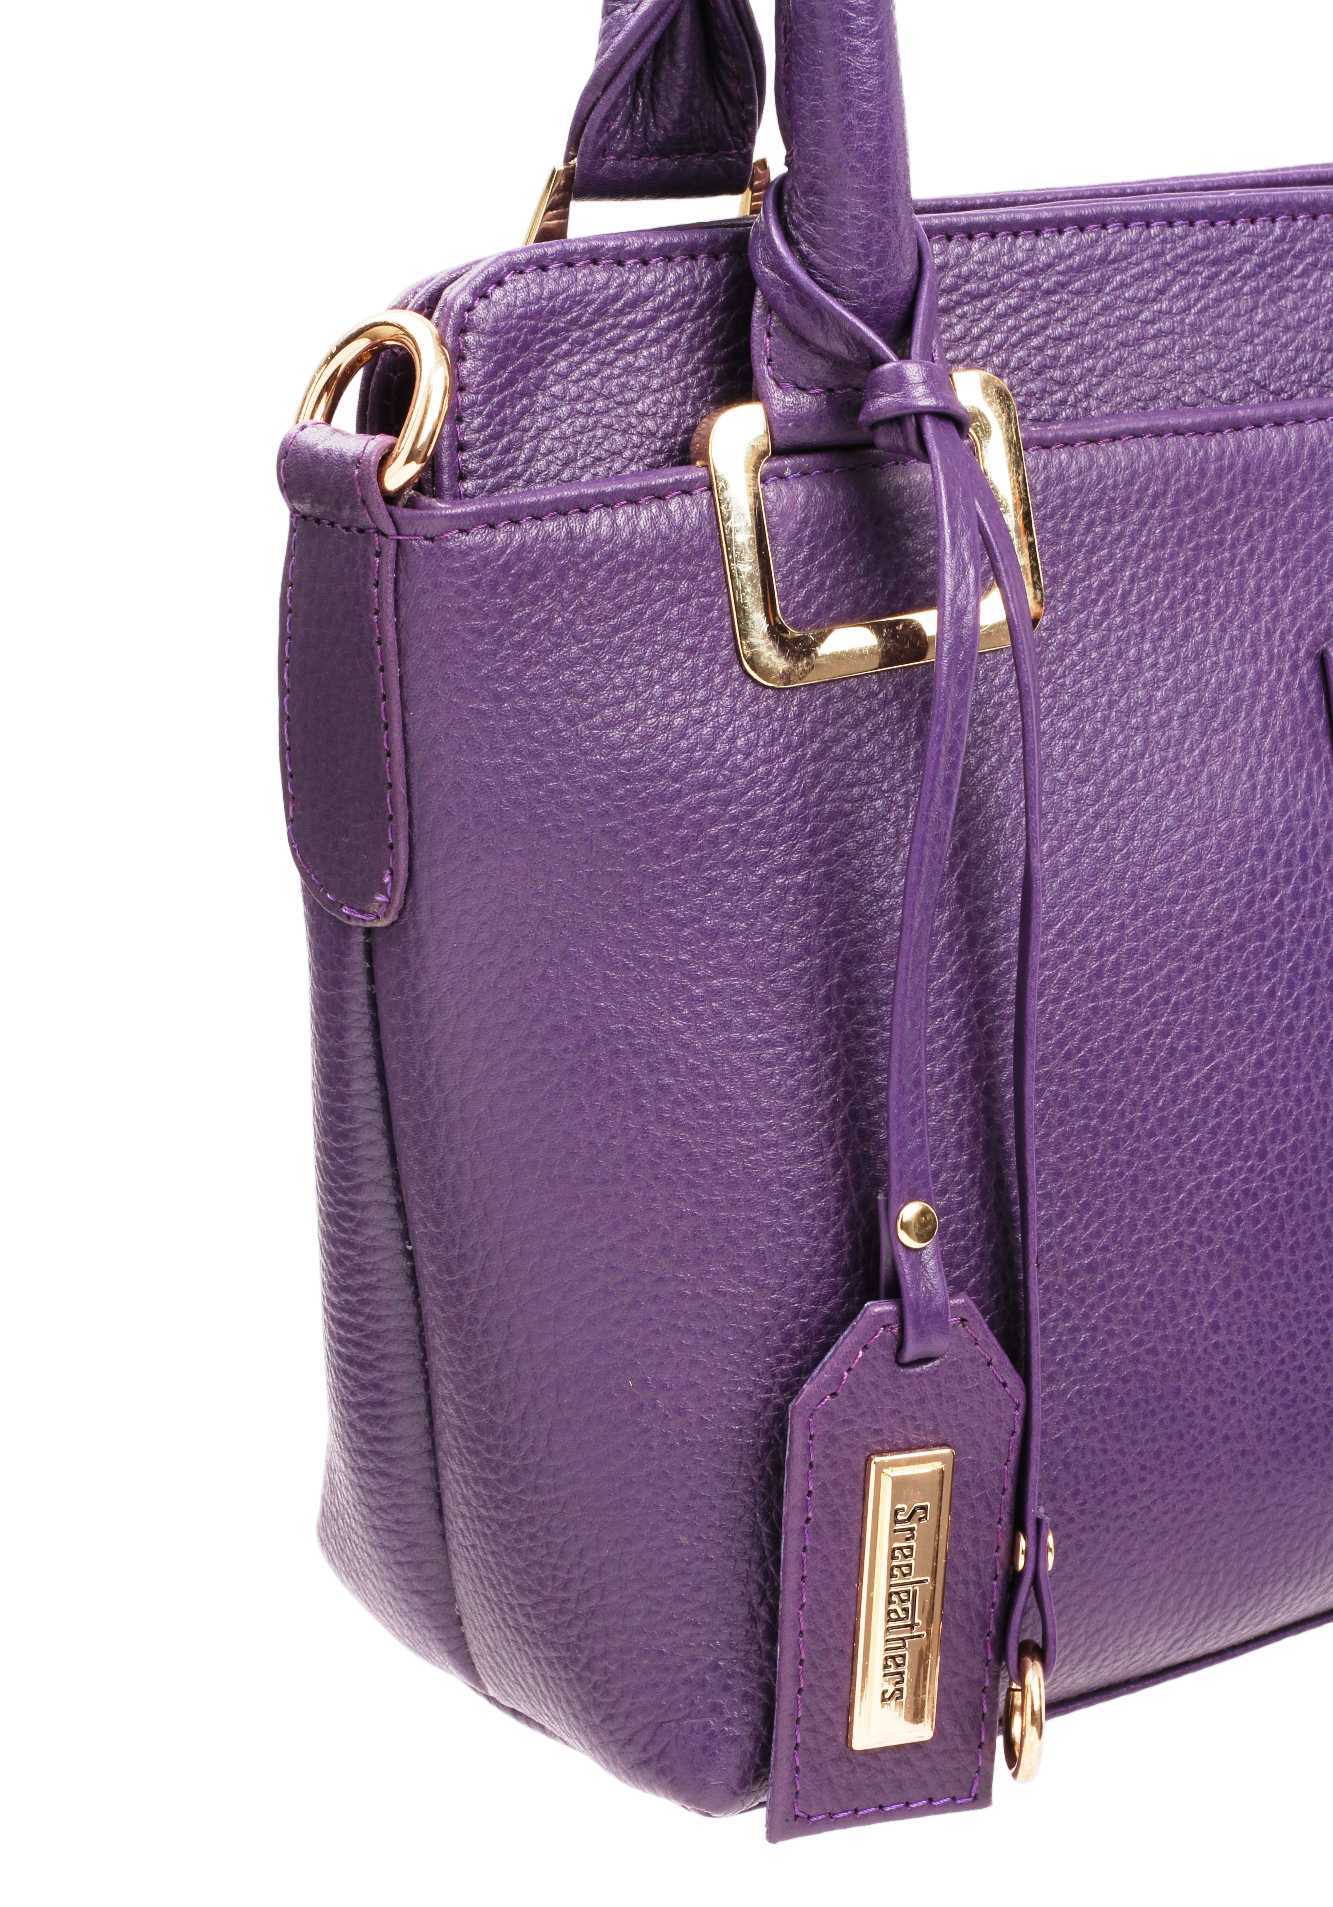 IMPORTED PURPLE TRENDY BAGS WITH FREE SMALL BAG